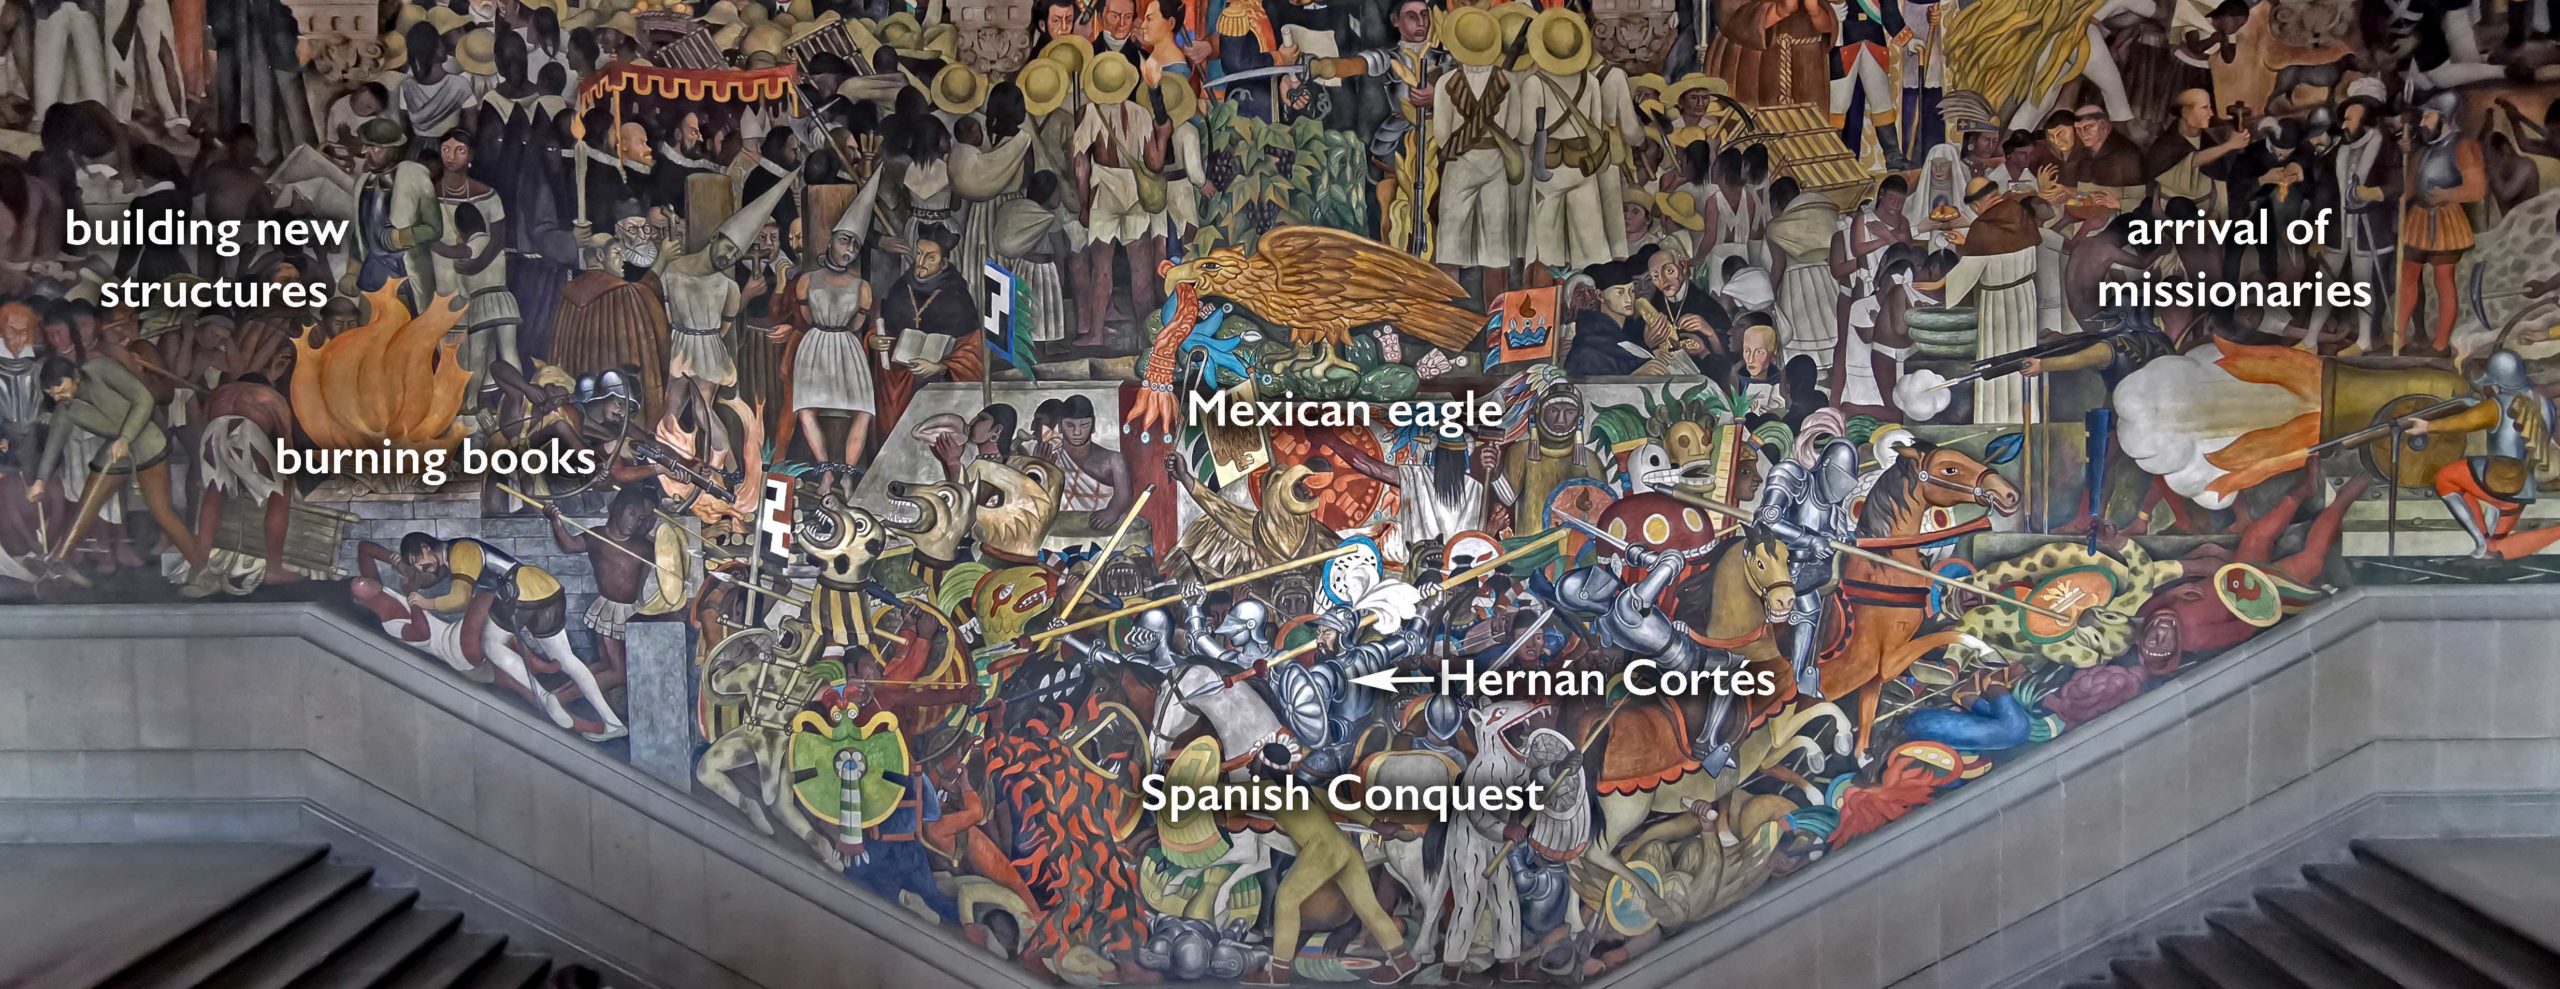 Diego Rivera mural in National Palace Mexico City art poster house of decor 